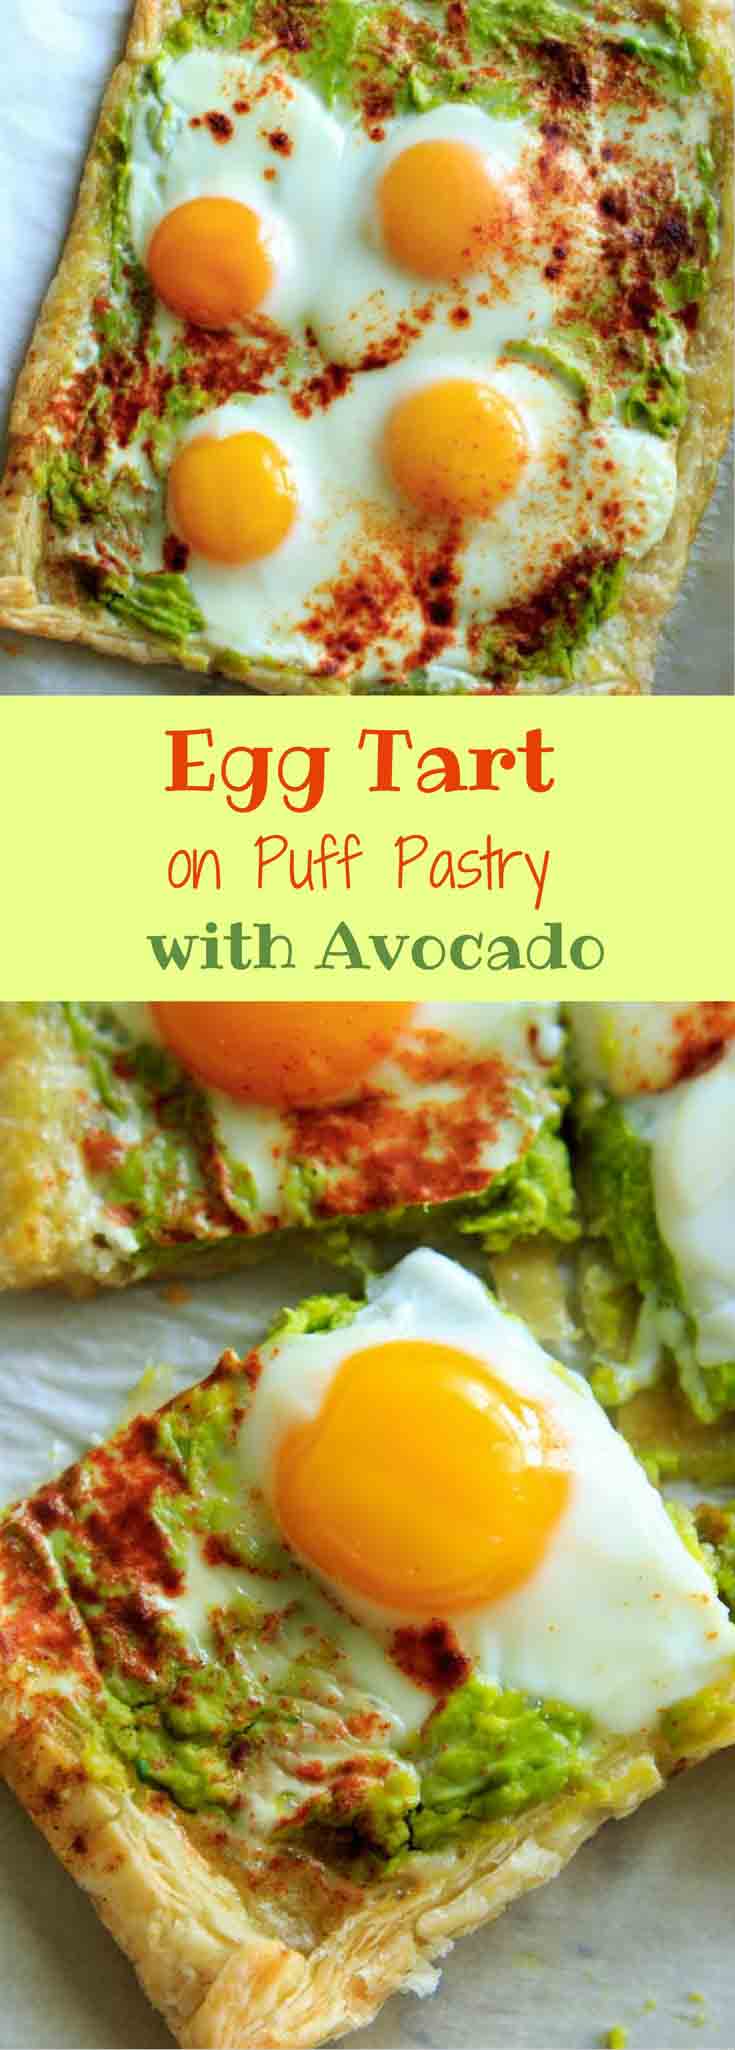 Avocado and Egg Tart on Puff Pastry pin